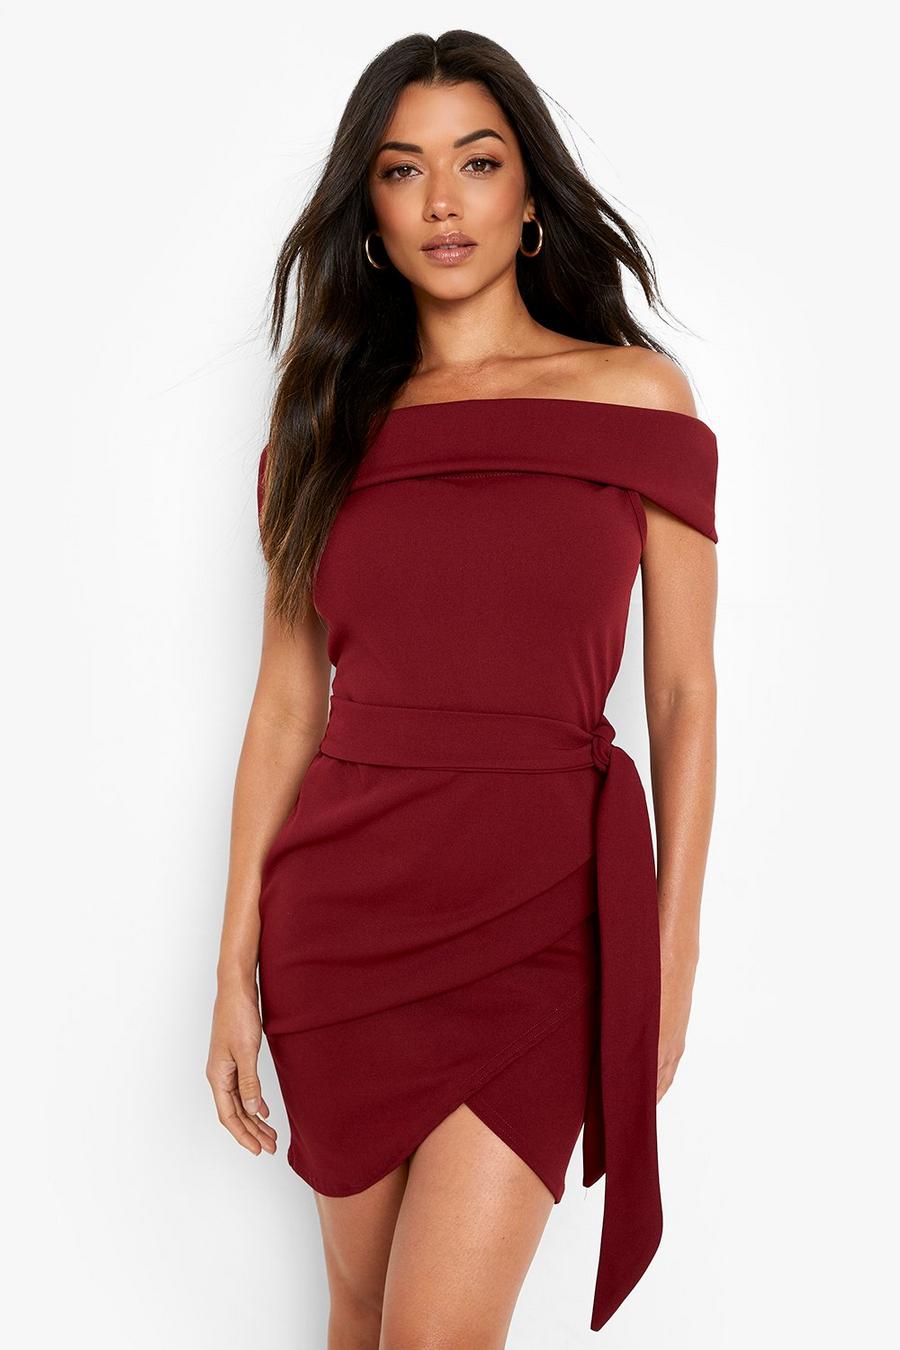 Boohoo Women Clothing Dresses Strapless Dresses 2 Womens Off The Shoulder Wrap Bodycon Dress 